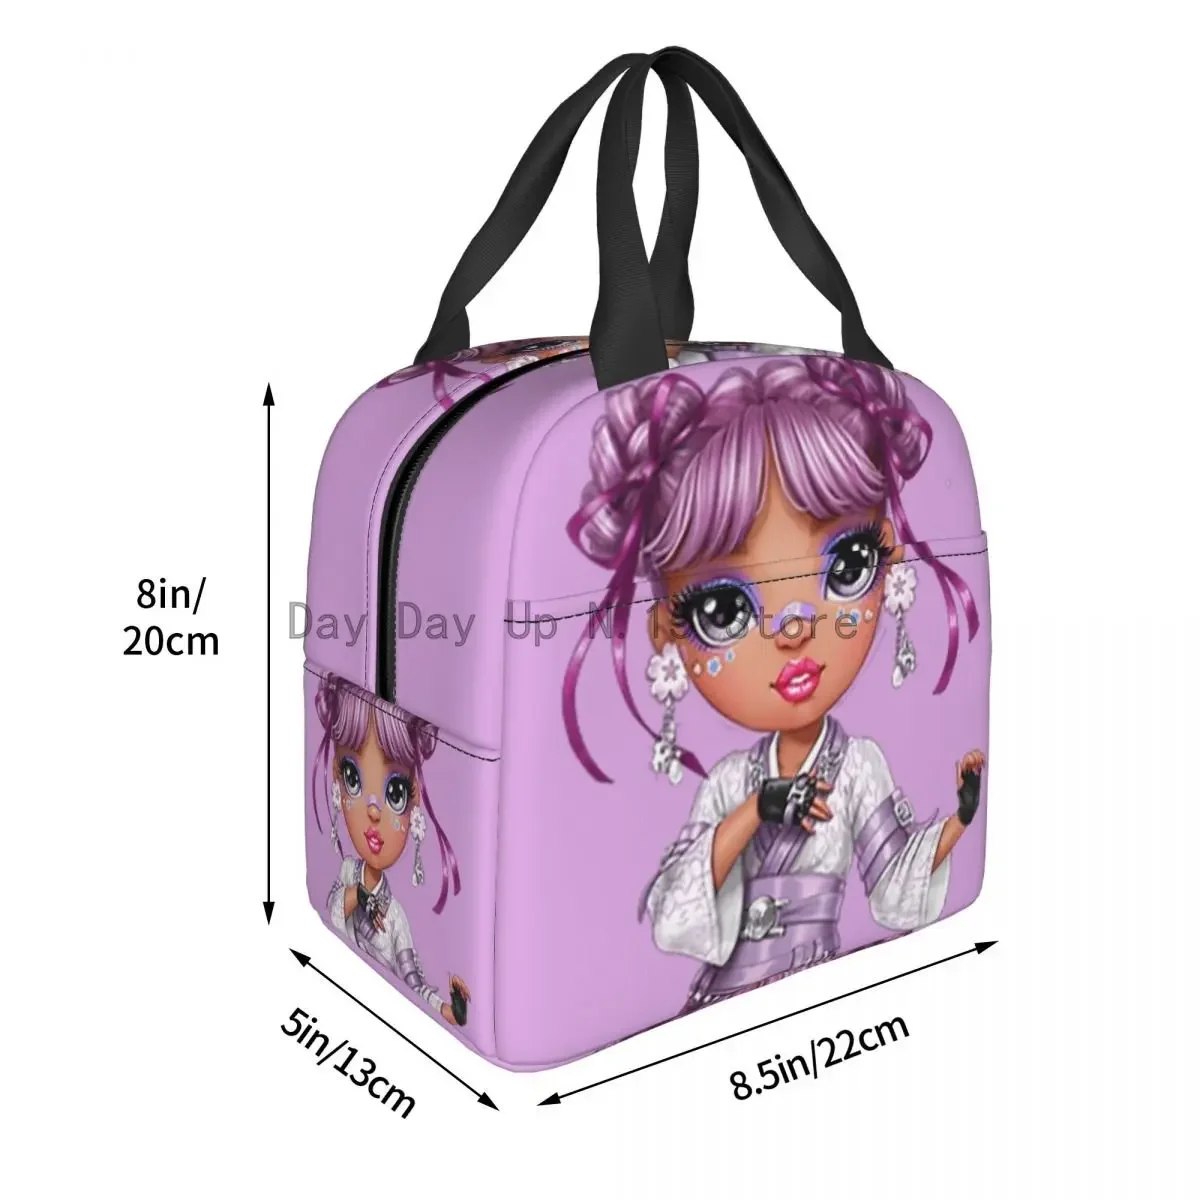 Rainbow High Lila Yamamoto Portable Lunch Box Multifunction Thermal Cooler Food Insulated Lunch Bag School Children Student